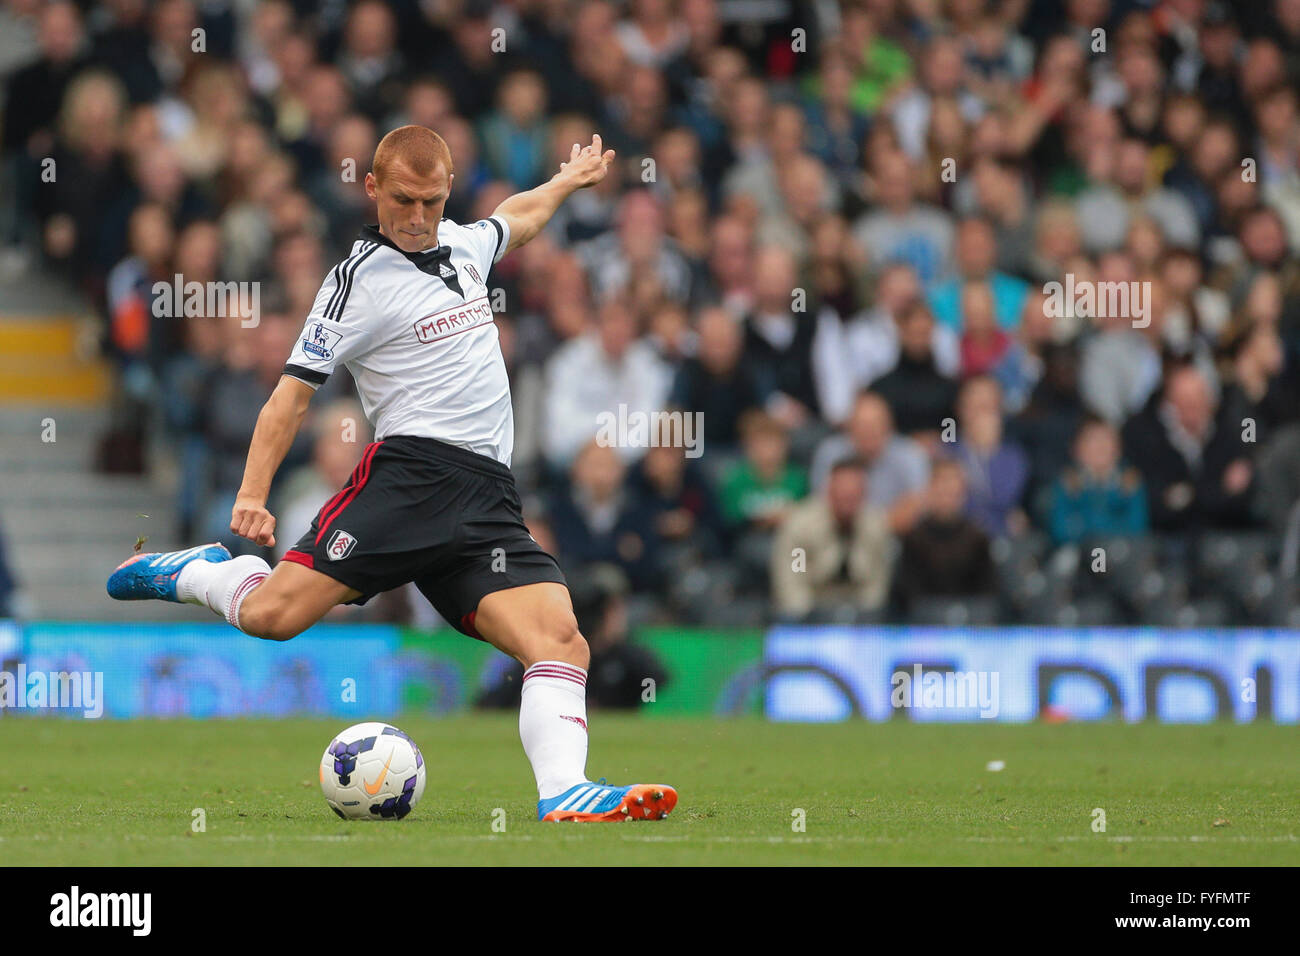 Steve Sidwell, Fulham, kicking the ball at a Premier League game between Fulham FC and Cardiff City, Craven Cottage Stadium Stock Photo